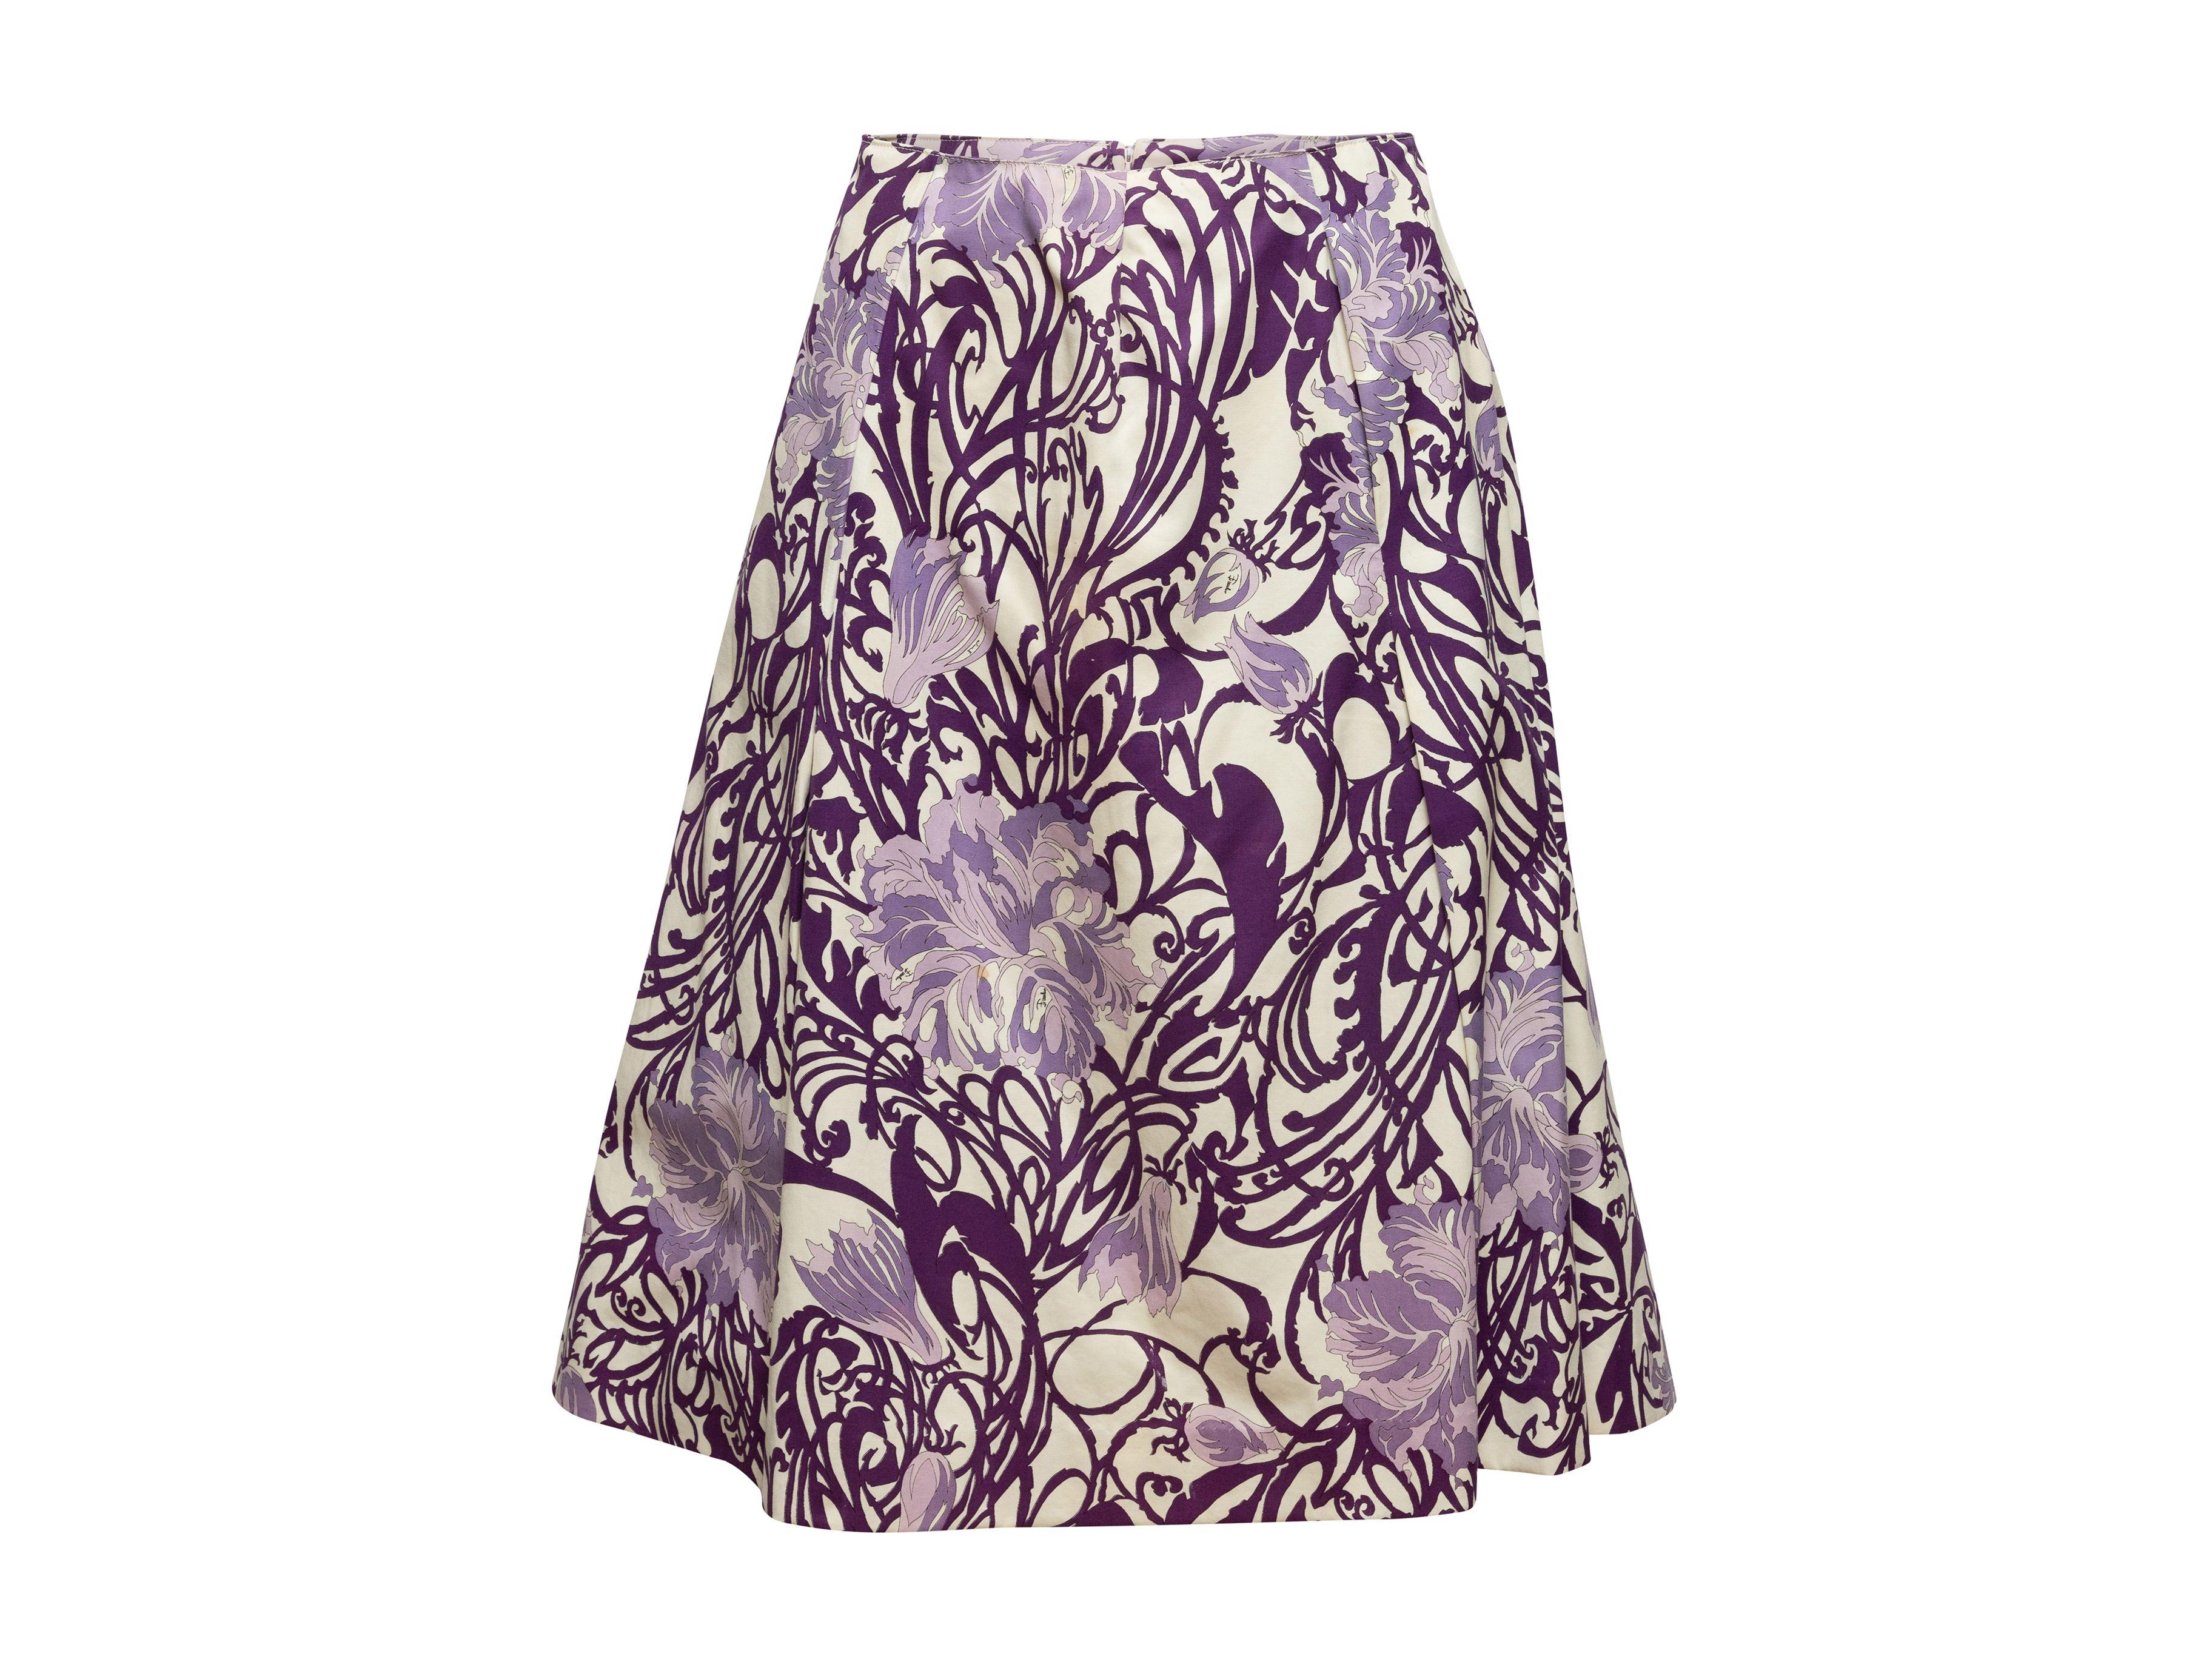 Product Details: Vintage purple and white floral print skirt by Emilio Pucci. Circa 1960s. Back zip closure. 30